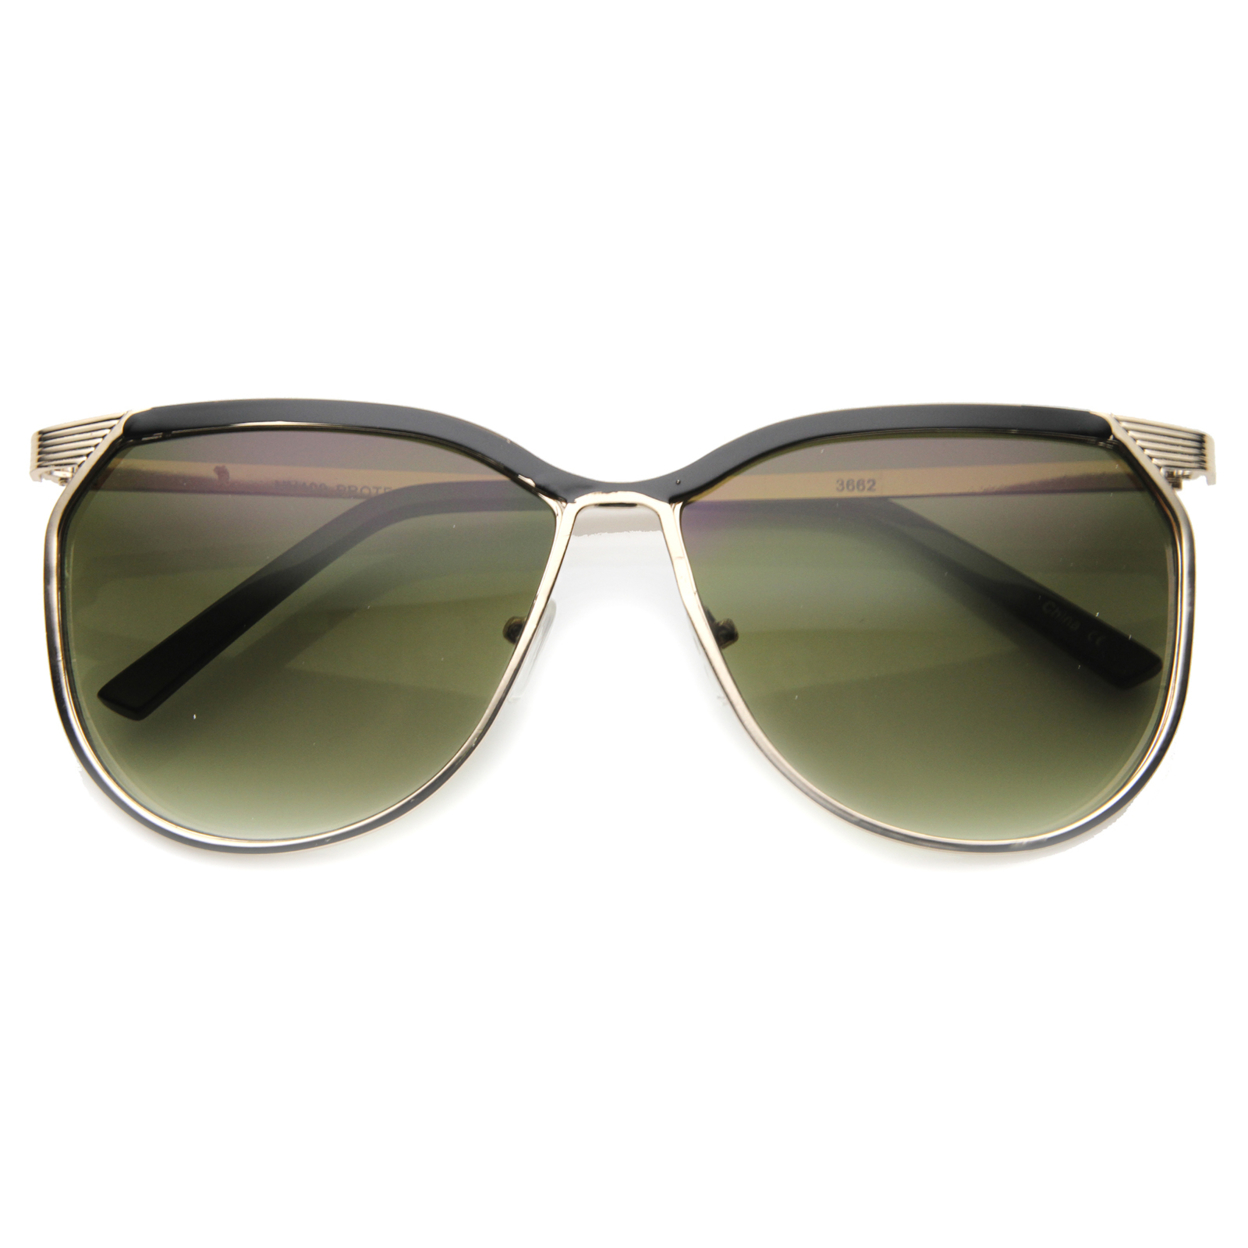 Unisex Metal Square Sunglasses With UV400 Protected Gradient Lens 9863 - Black-Gold / Green